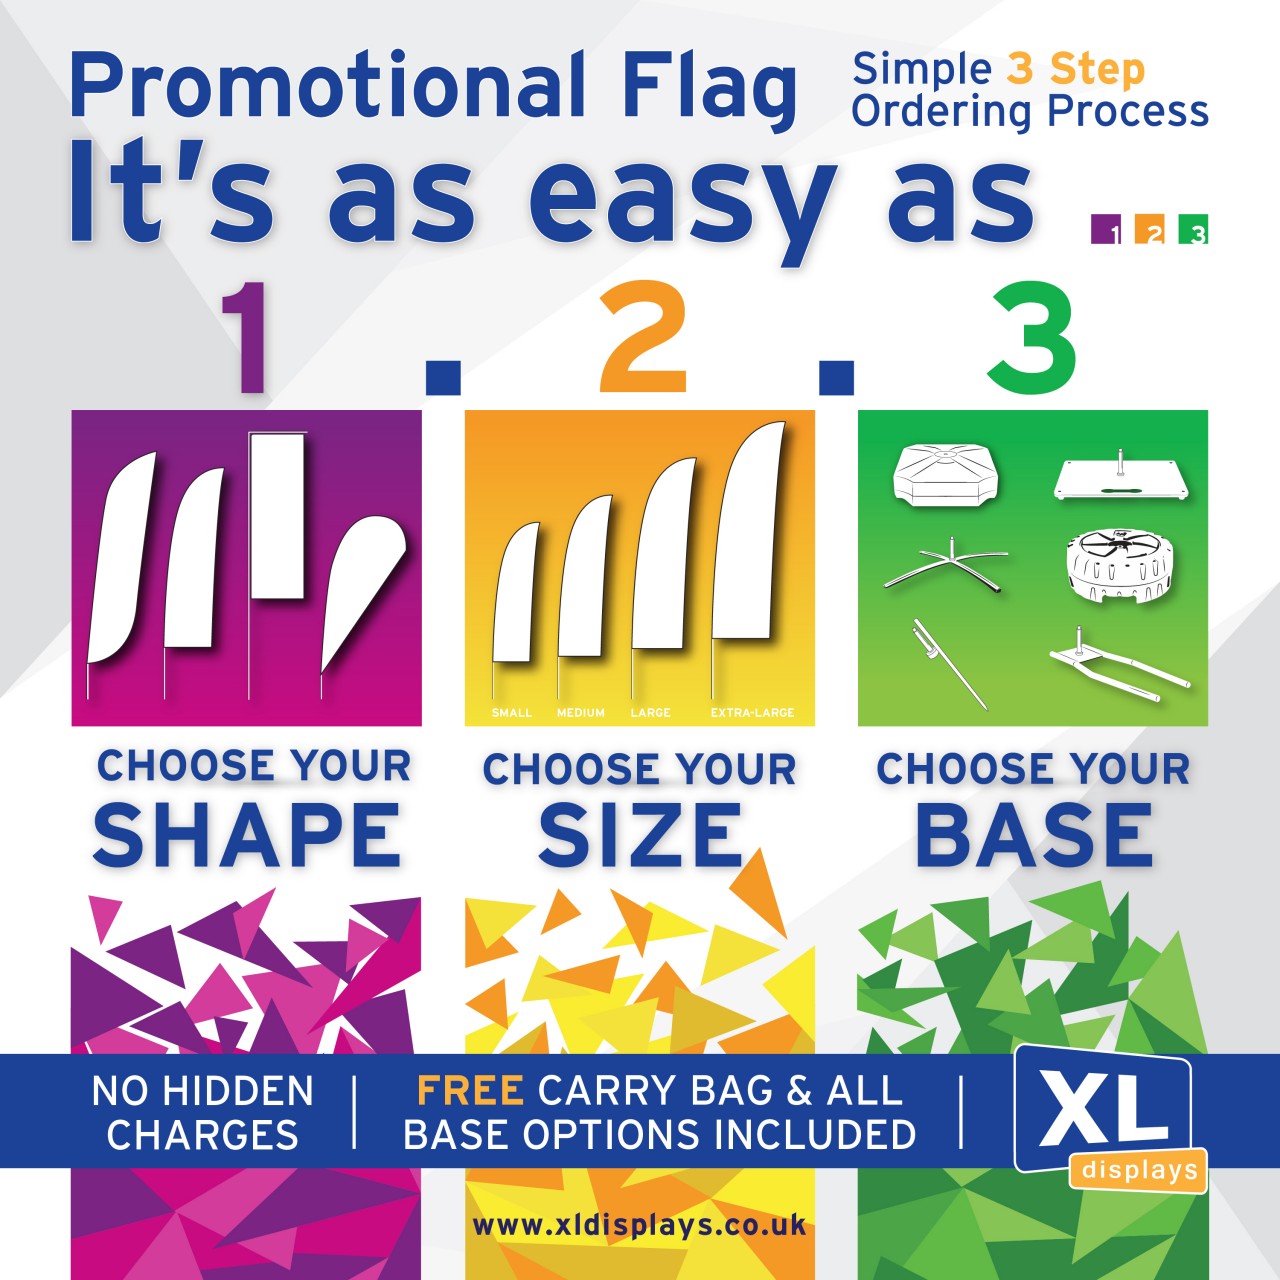 Simple 3 Step Buying Process for Promotional Flags by XL Displays